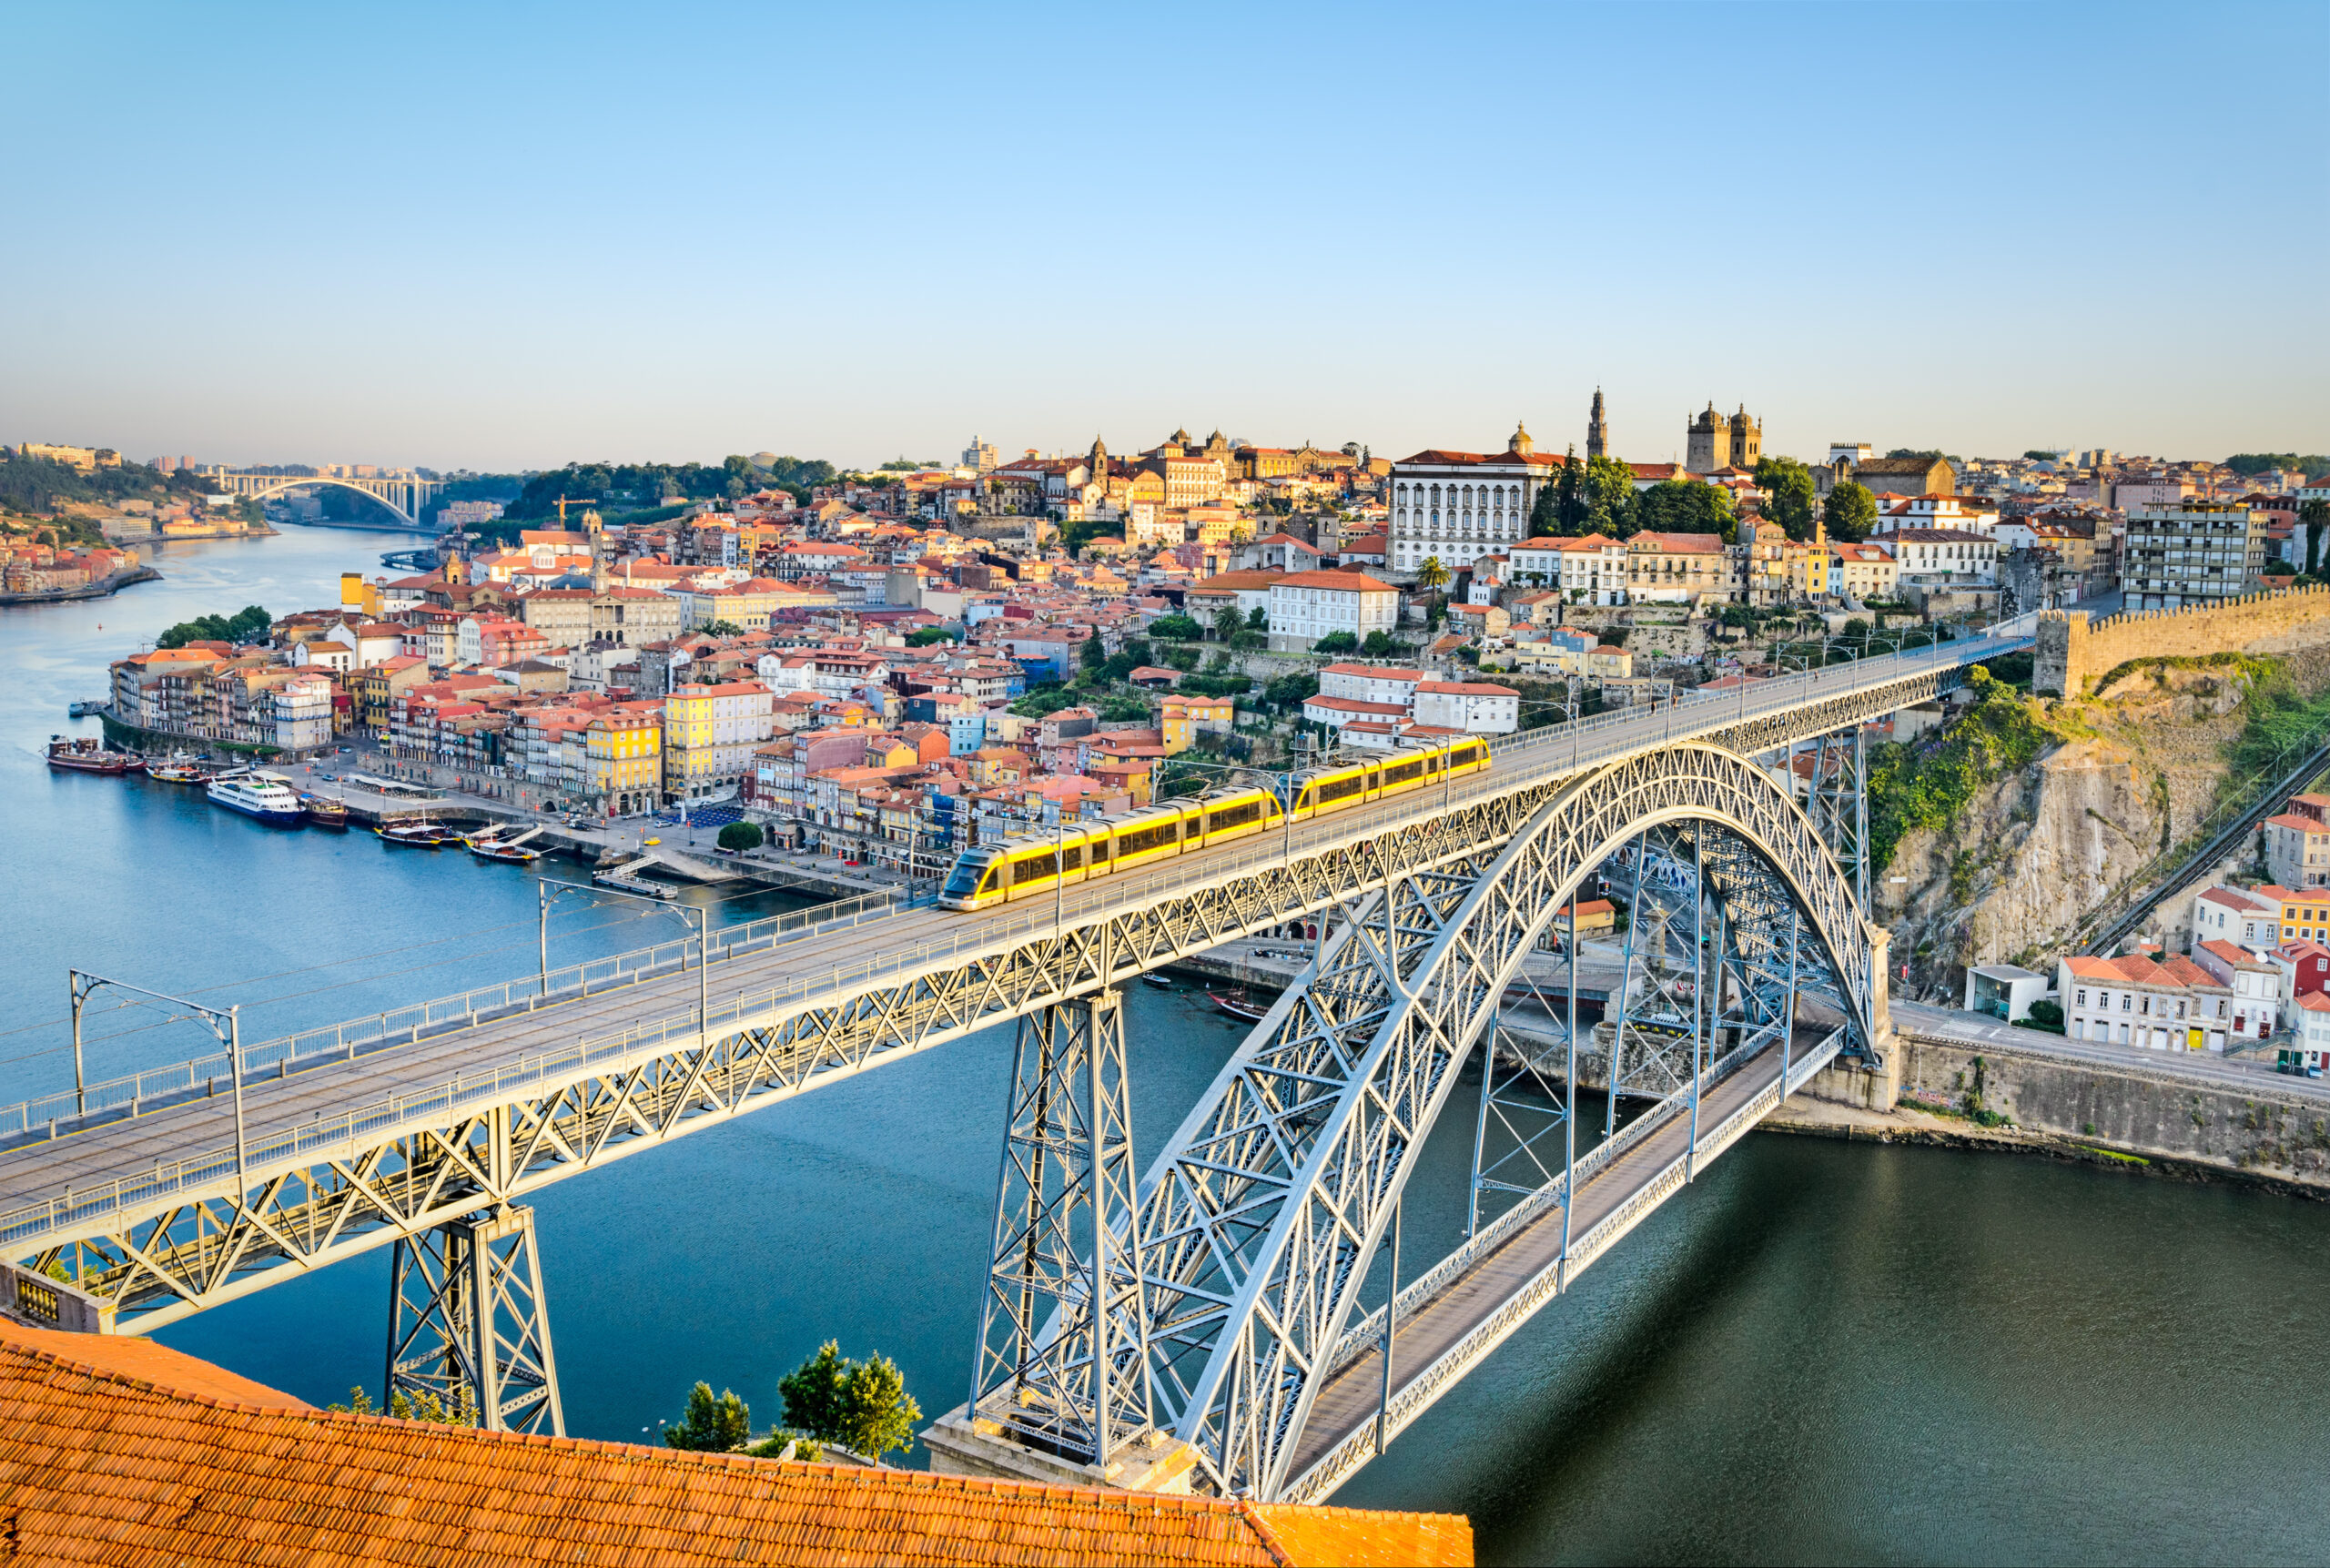 production-services-and-filming-in-portugal-iron-bridge-over-river